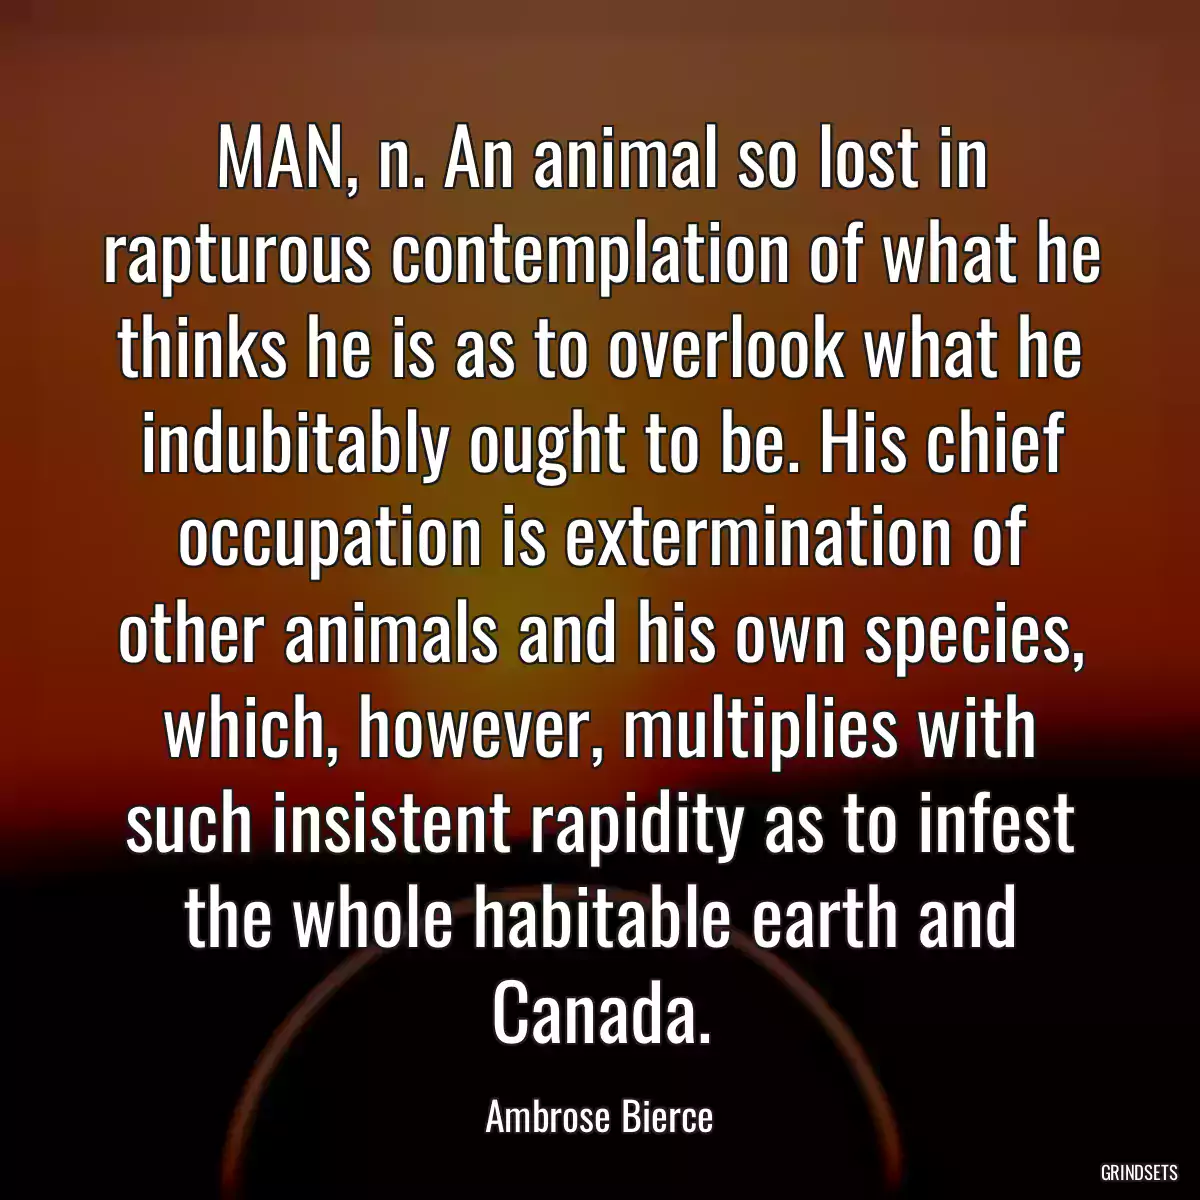 MAN, n. An animal so lost in rapturous contemplation of what he thinks he is as to overlook what he indubitably ought to be. His chief occupation is extermination of other animals and his own species, which, however, multiplies with such insistent rapidity as to infest the whole habitable earth and Canada.